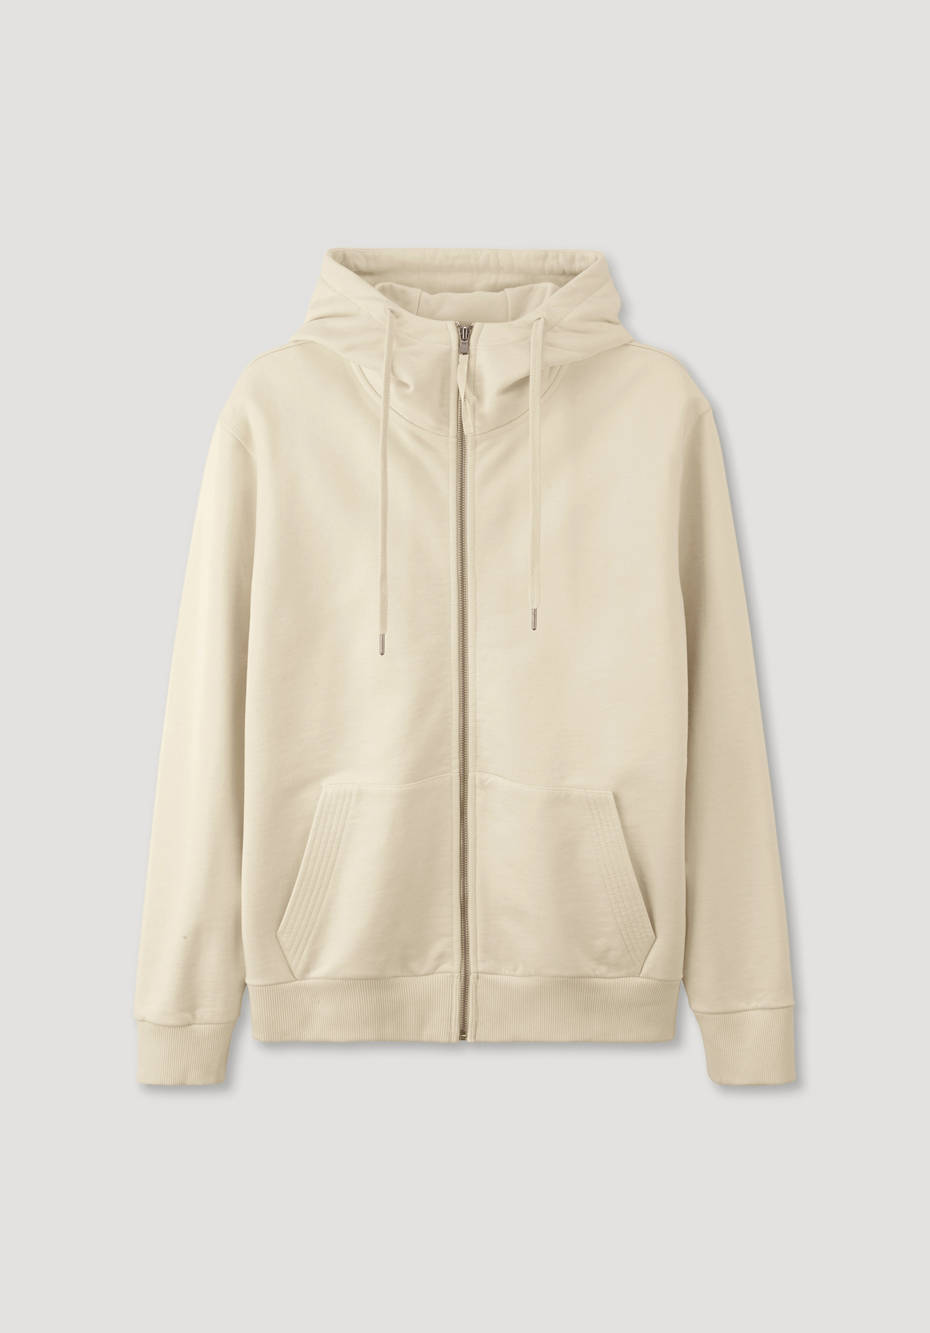 Mineral-dyed zip hoodie made from pure organic cotton